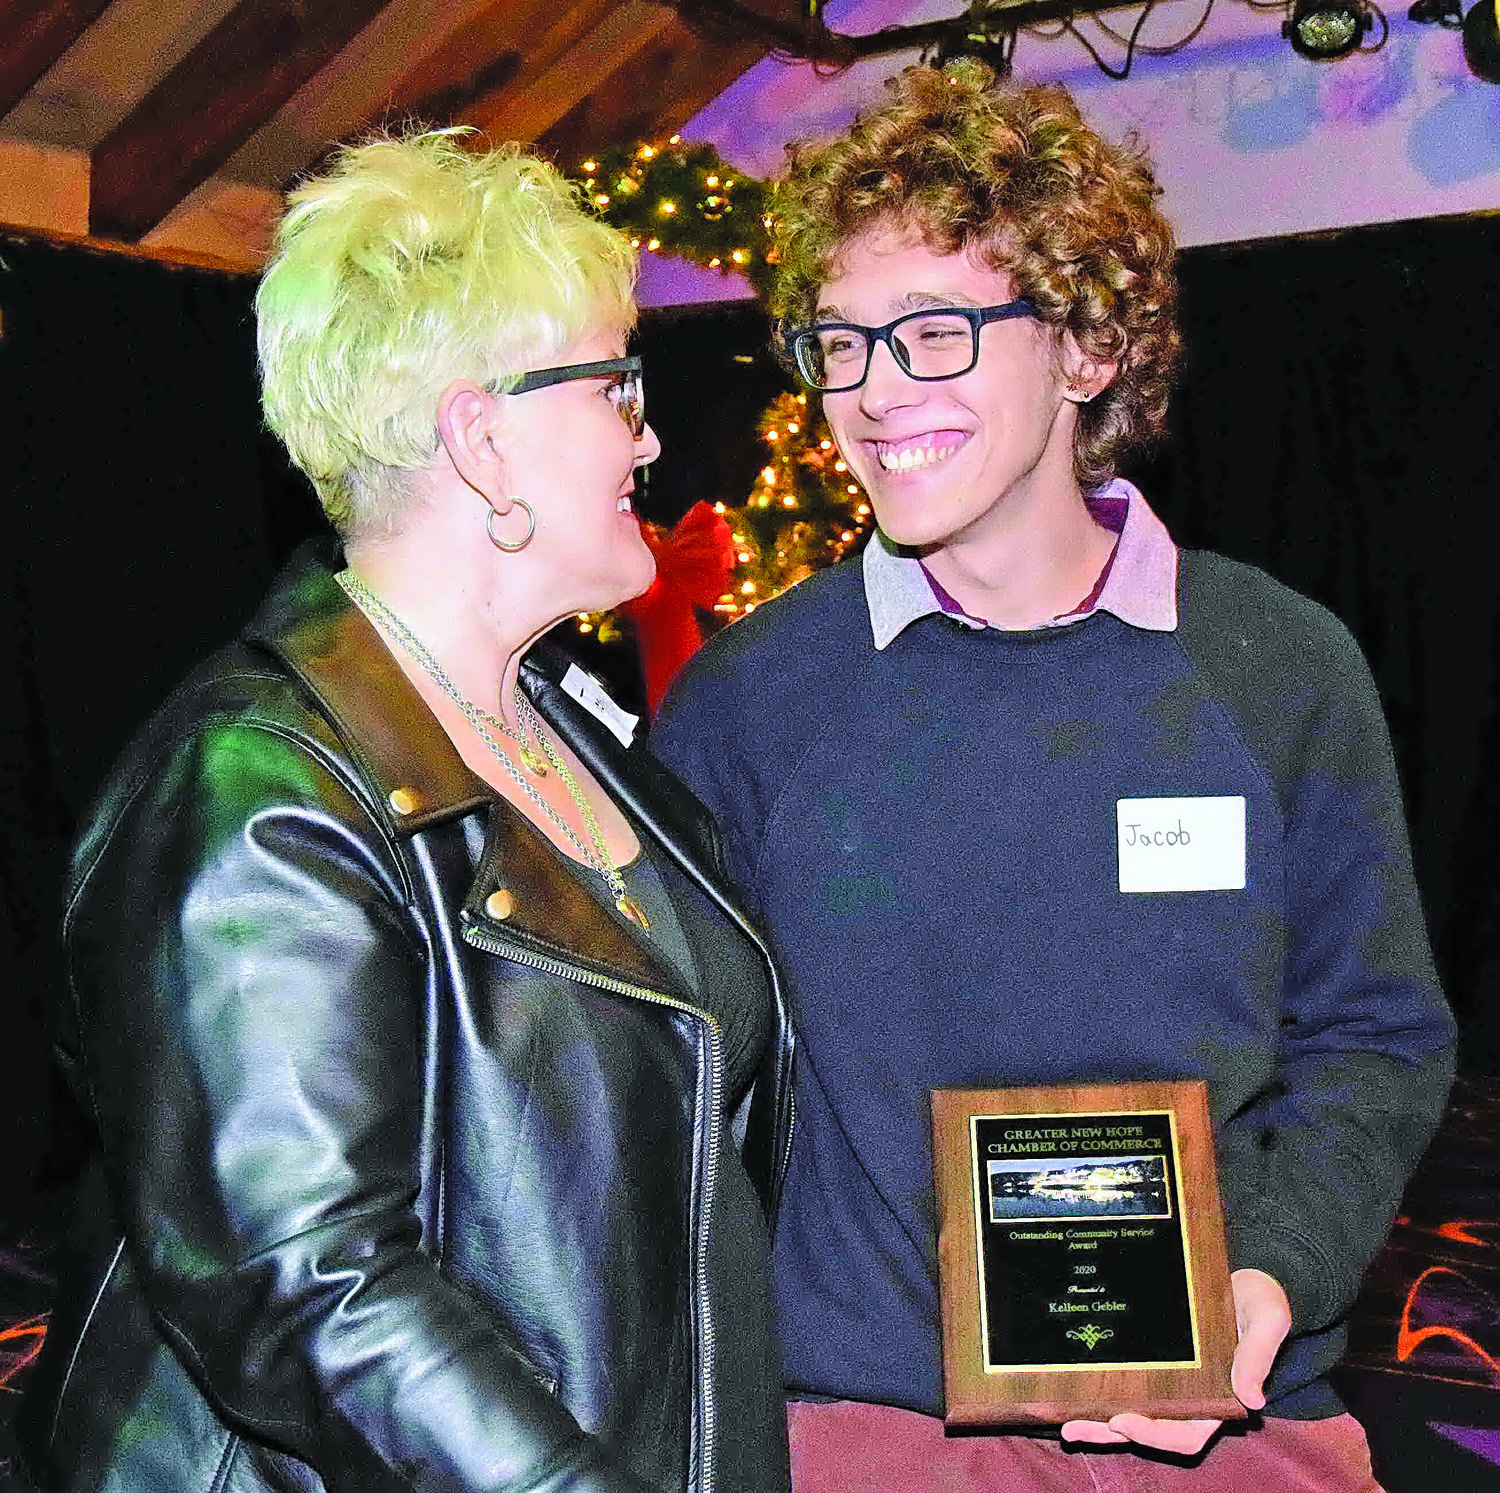 Accepting the 2020 Outstanding Community Service Award for Kelleen Gebler, Go to Concierge, is her son Jacob.